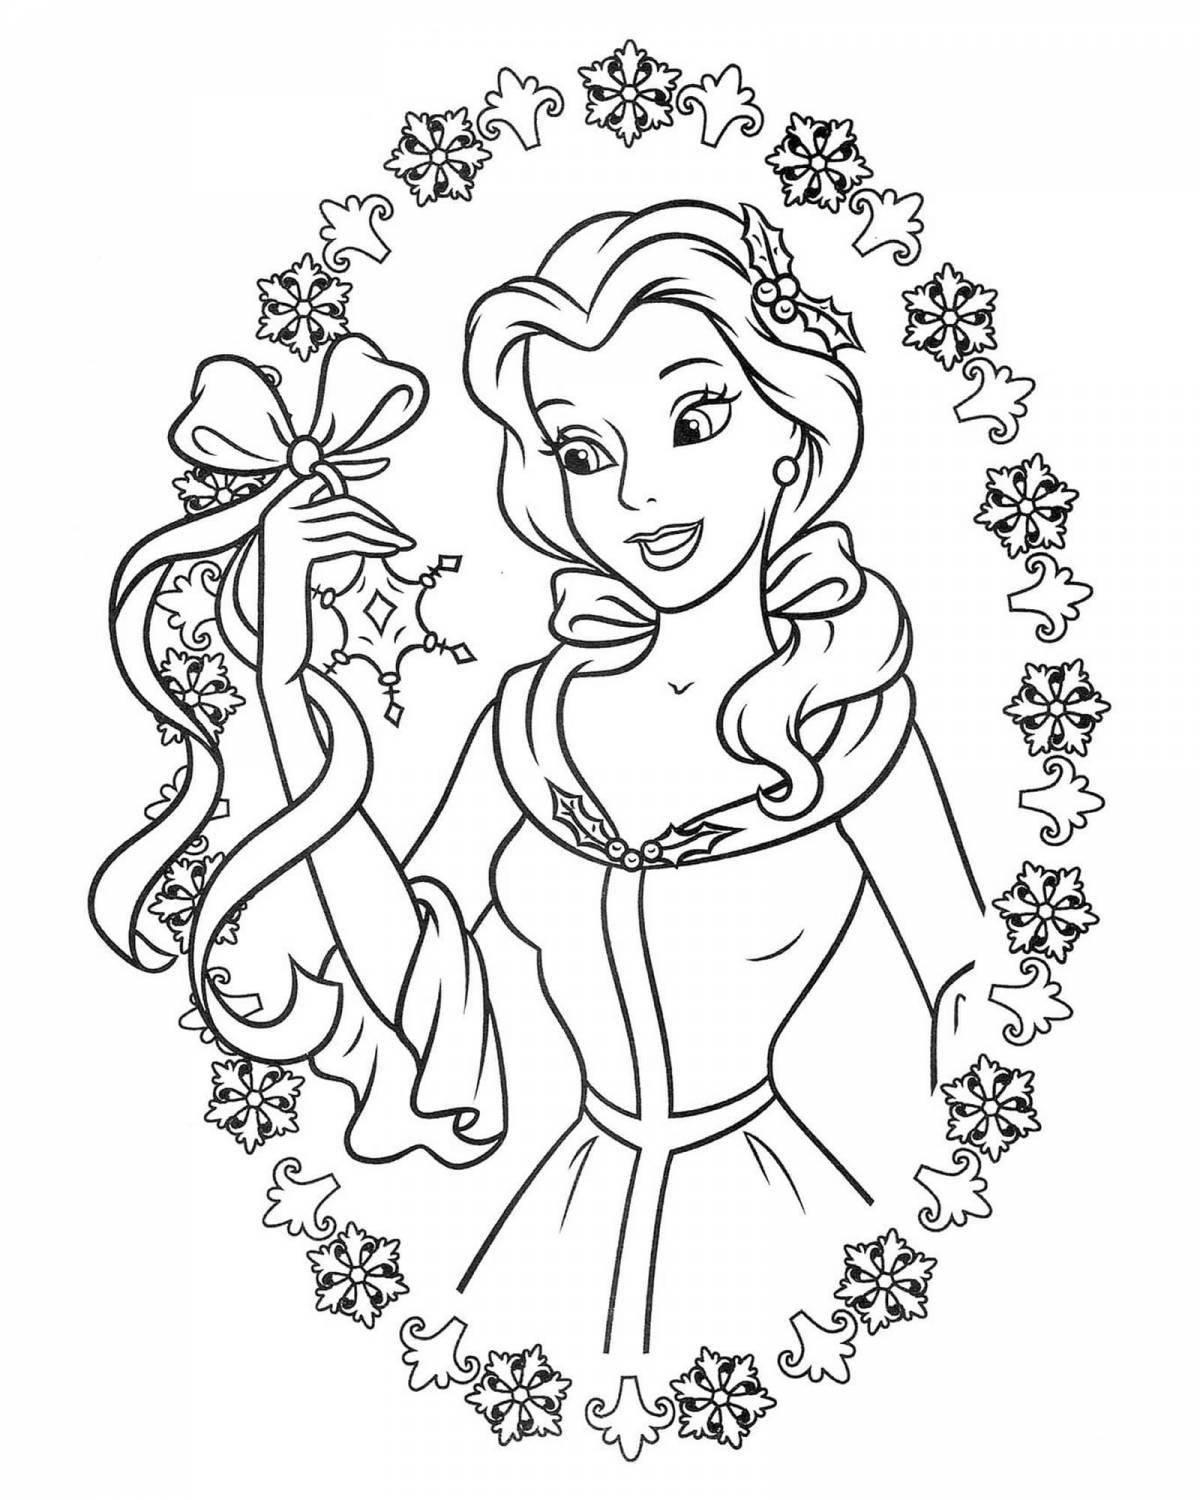 Incredible coloring book for kids with disney princesses